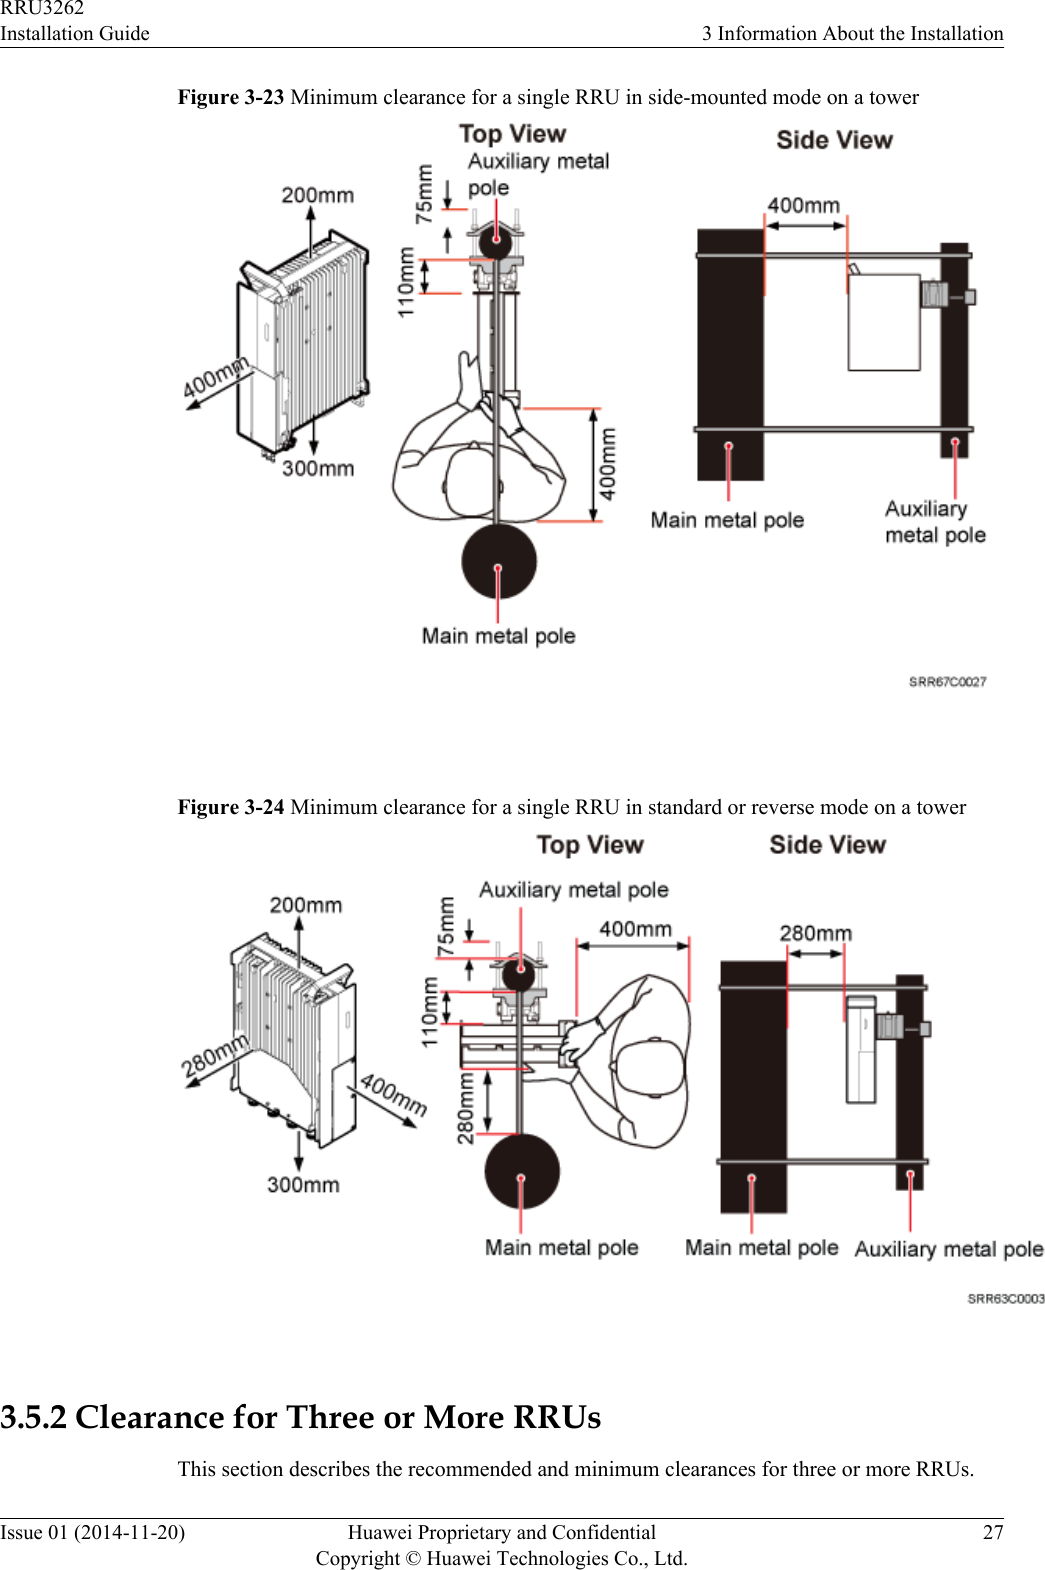 Figure 3-23 Minimum clearance for a single RRU in side-mounted mode on a tower Figure 3-24 Minimum clearance for a single RRU in standard or reverse mode on a tower 3.5.2 Clearance for Three or More RRUsThis section describes the recommended and minimum clearances for three or more RRUs.RRU3262Installation Guide 3 Information About the InstallationIssue 01 (2014-11-20) Huawei Proprietary and ConfidentialCopyright © Huawei Technologies Co., Ltd.27